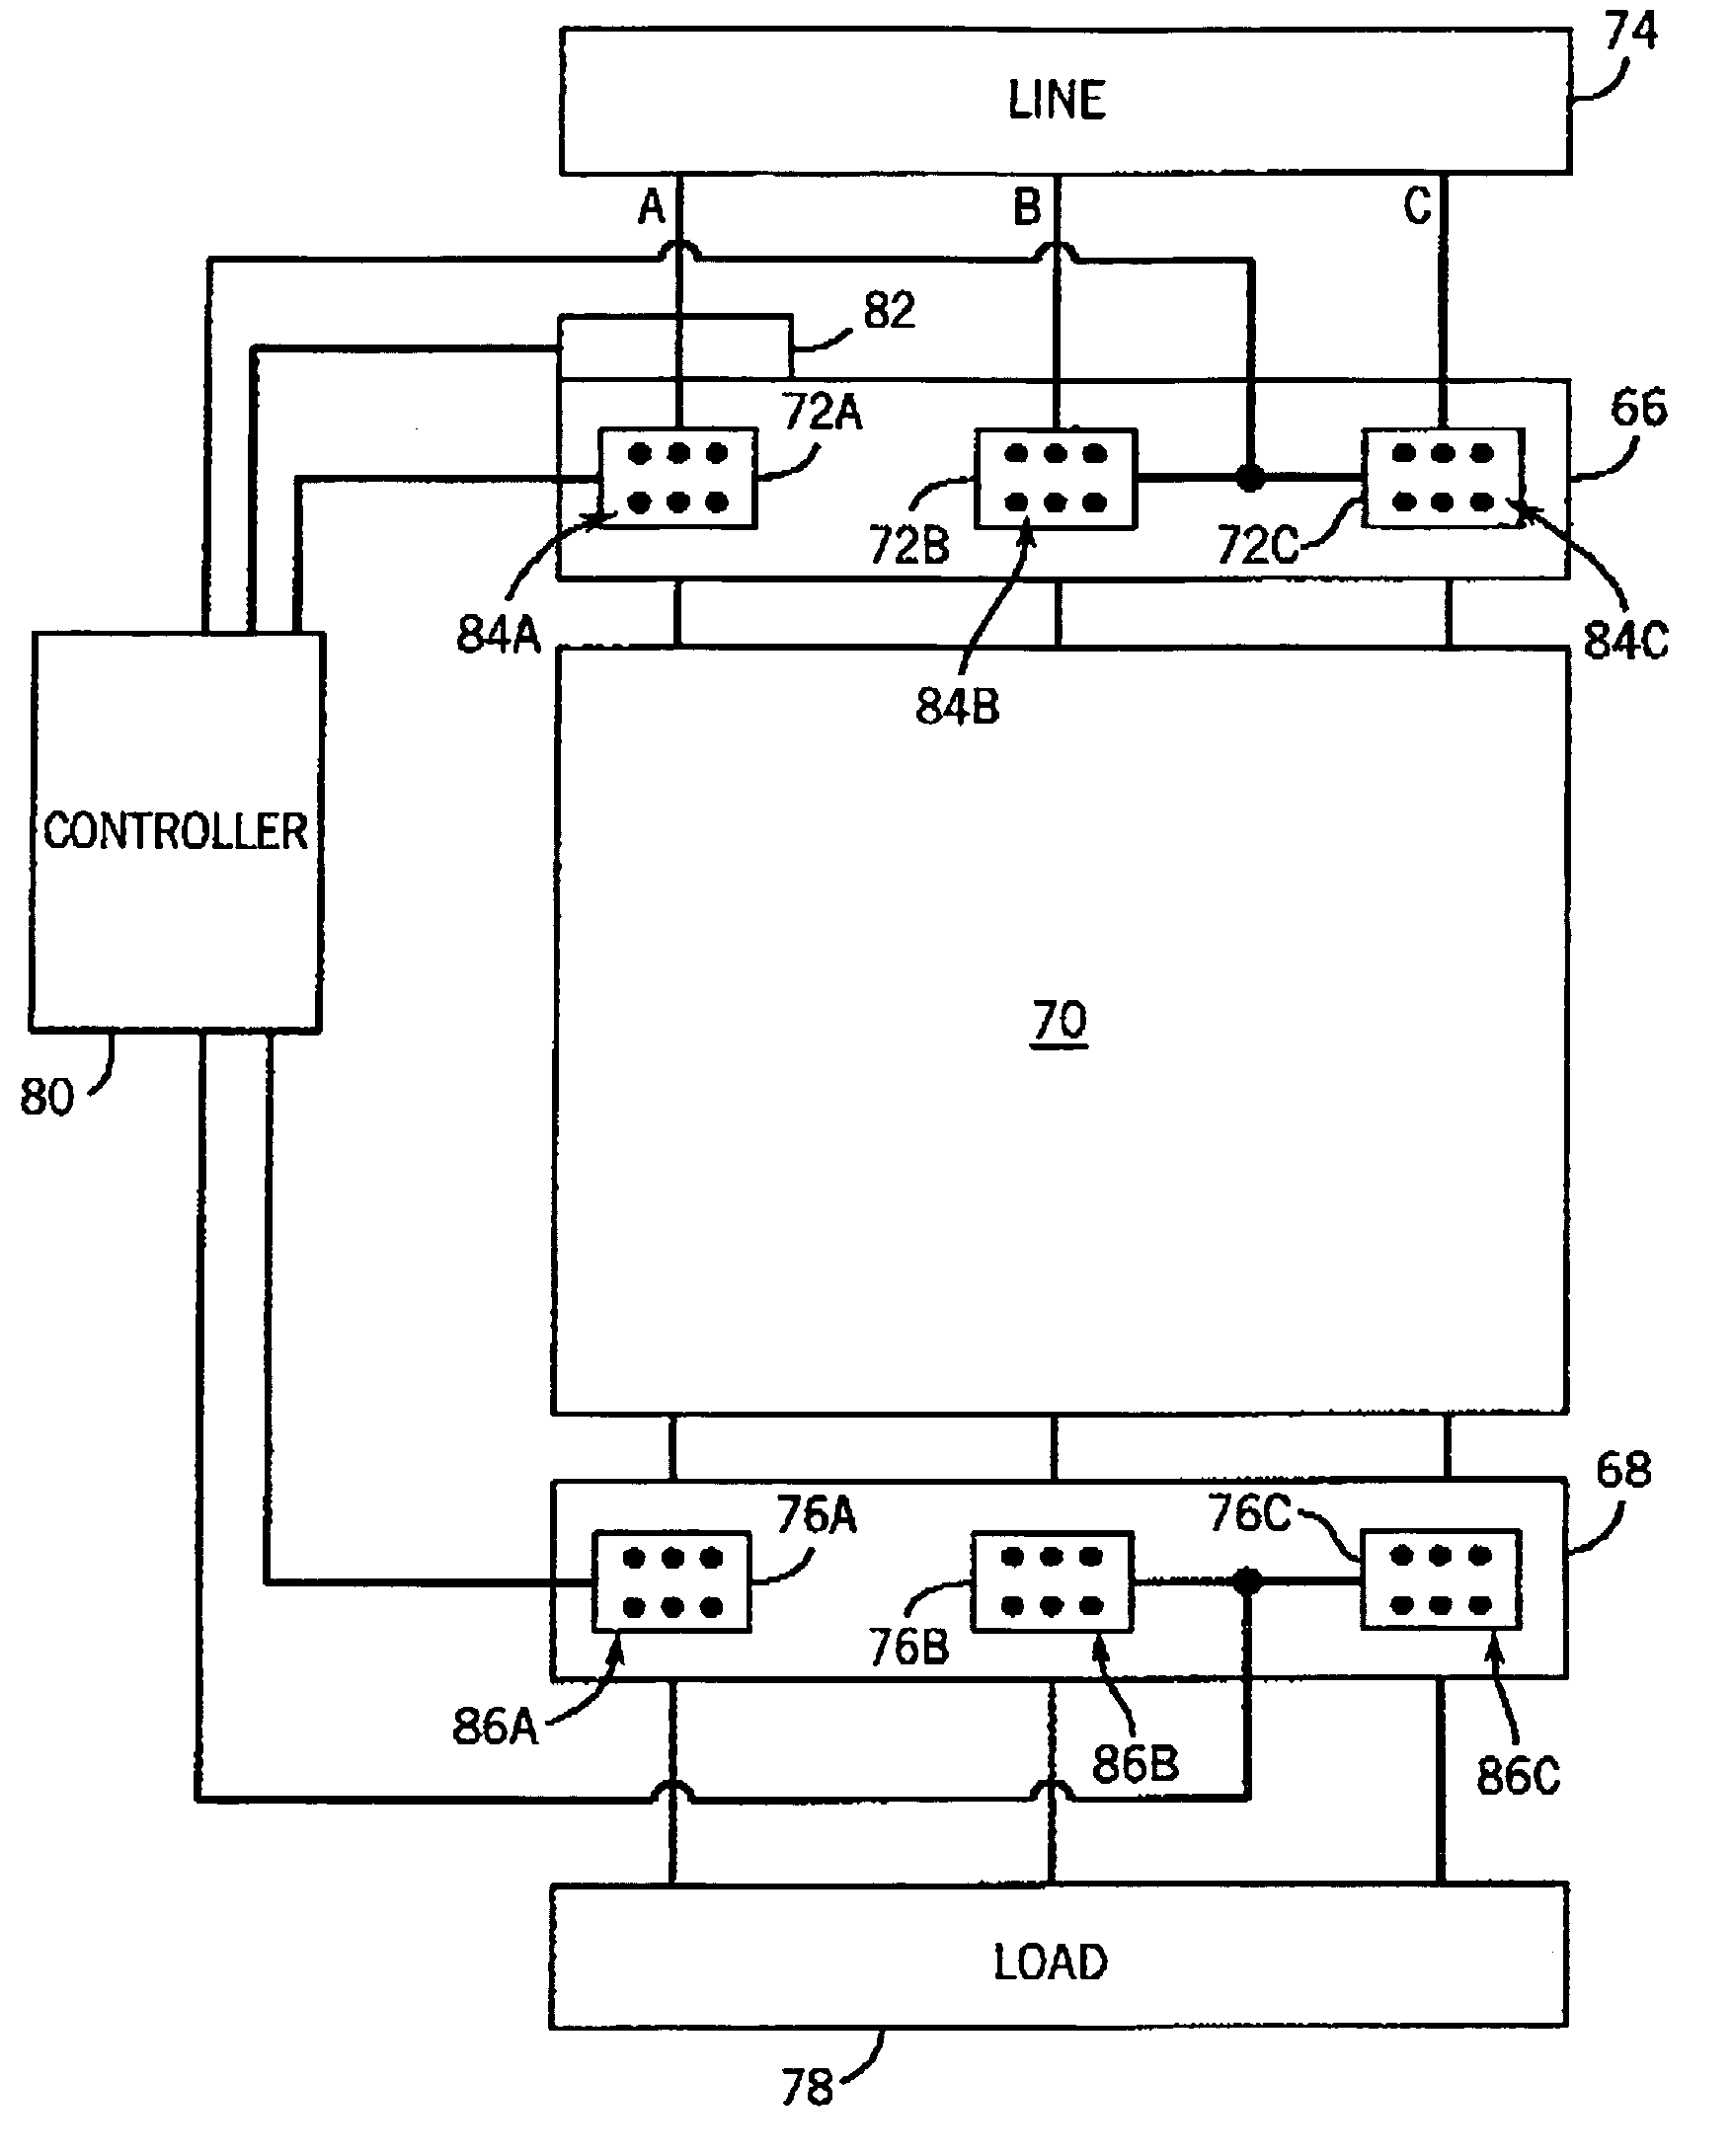 Modular contactor assembly having independently controllable contractors